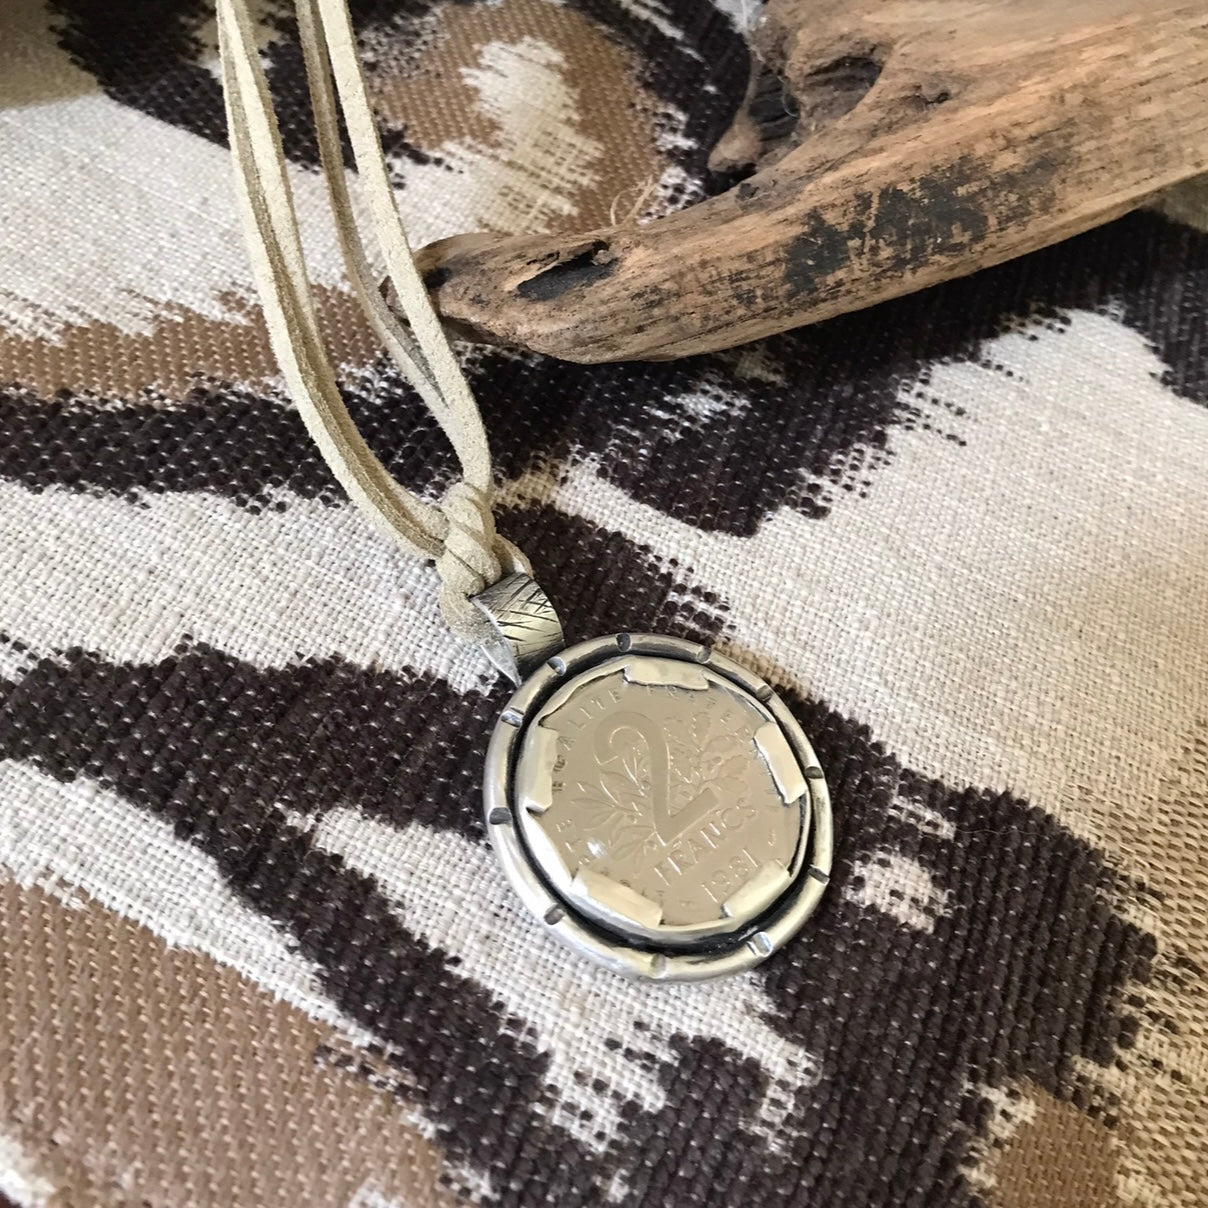 Coin Charm Necklace